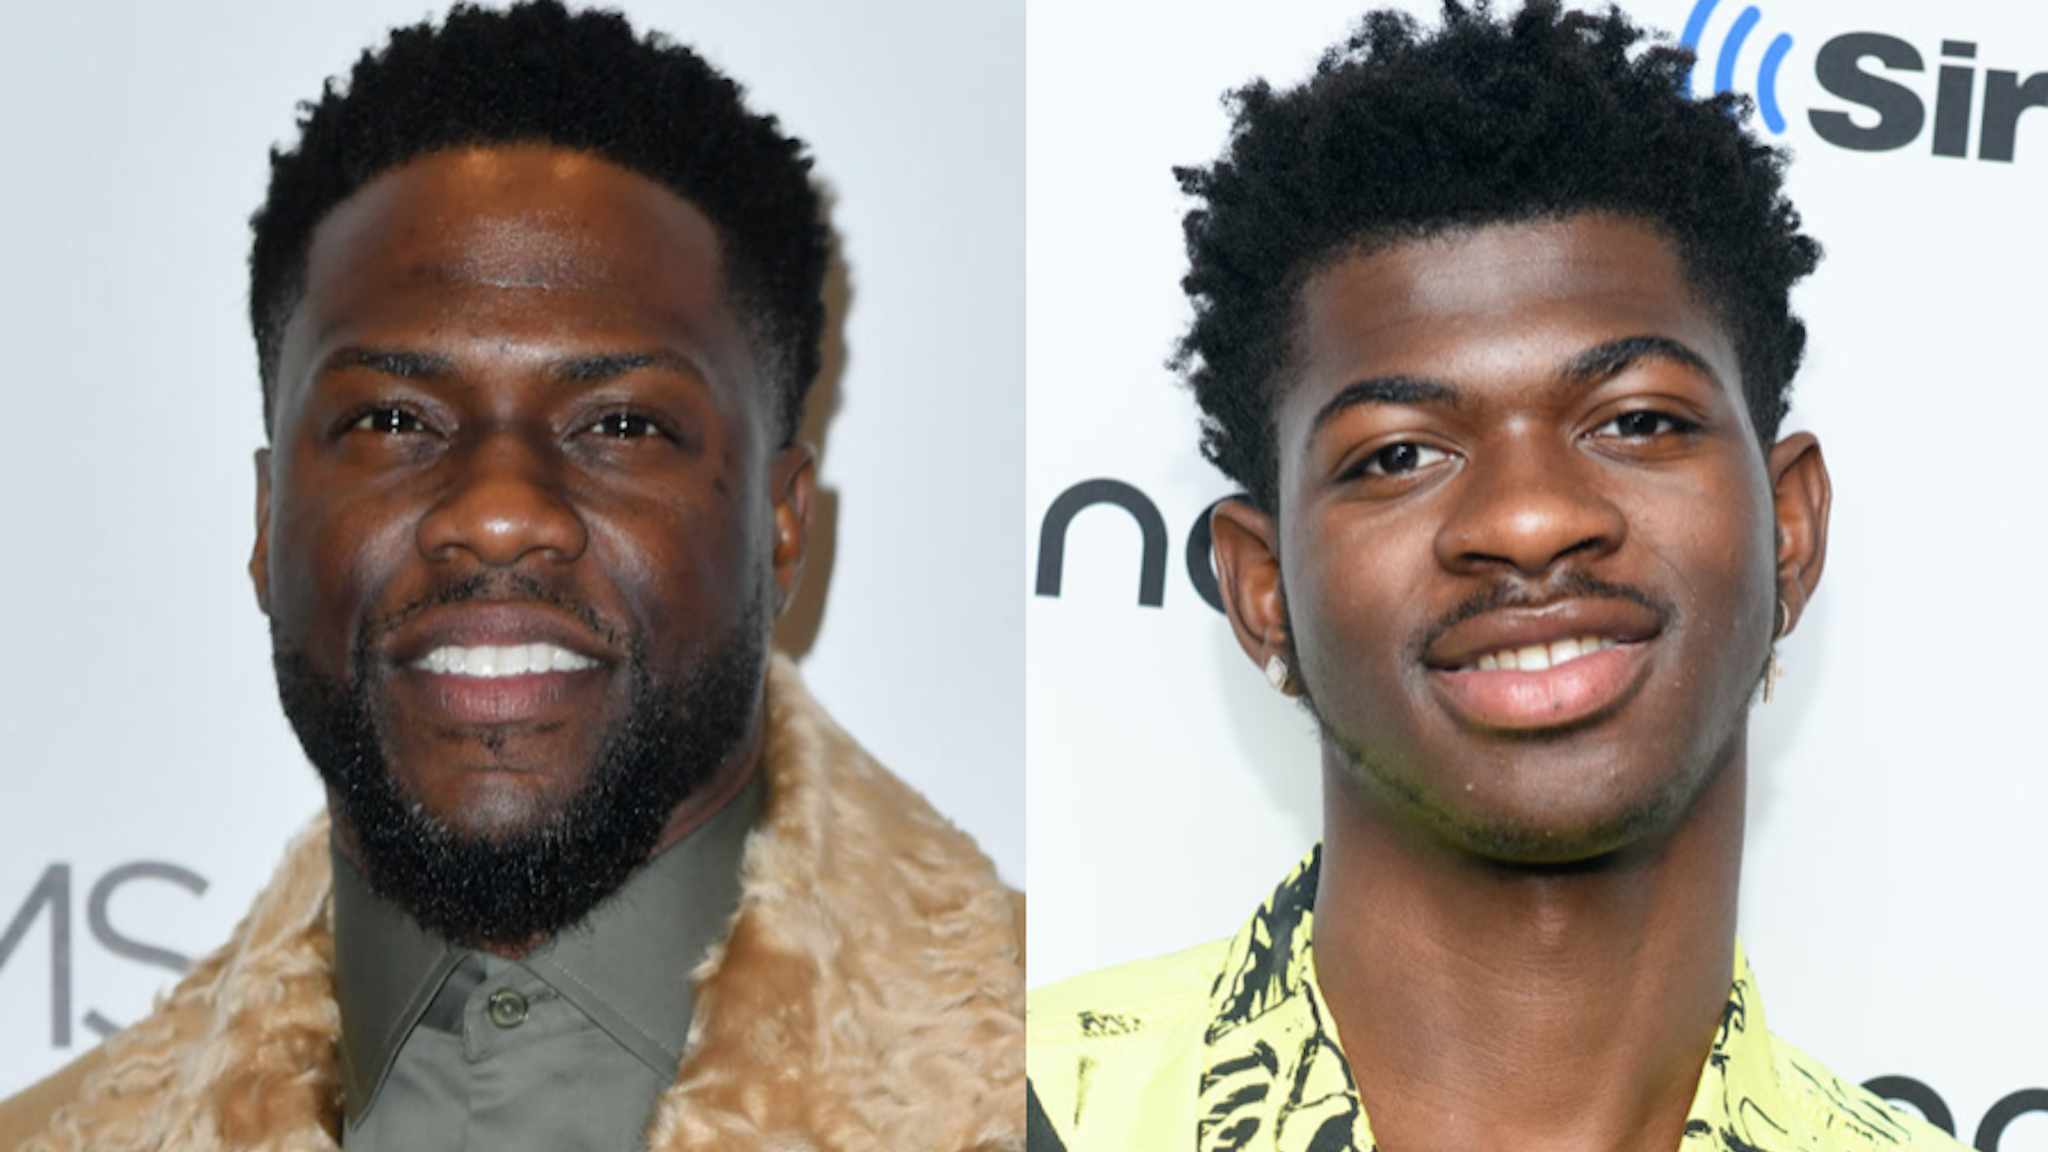 Actor Kevin Hart attends The MOMS Mamarazzi event to celebrate "The Upside" on January 9, 2019 at the New York Institute of Technology in New York City.//Lil Nas X visits the SiriusXM Studios on August 28, 2019 in New York City.